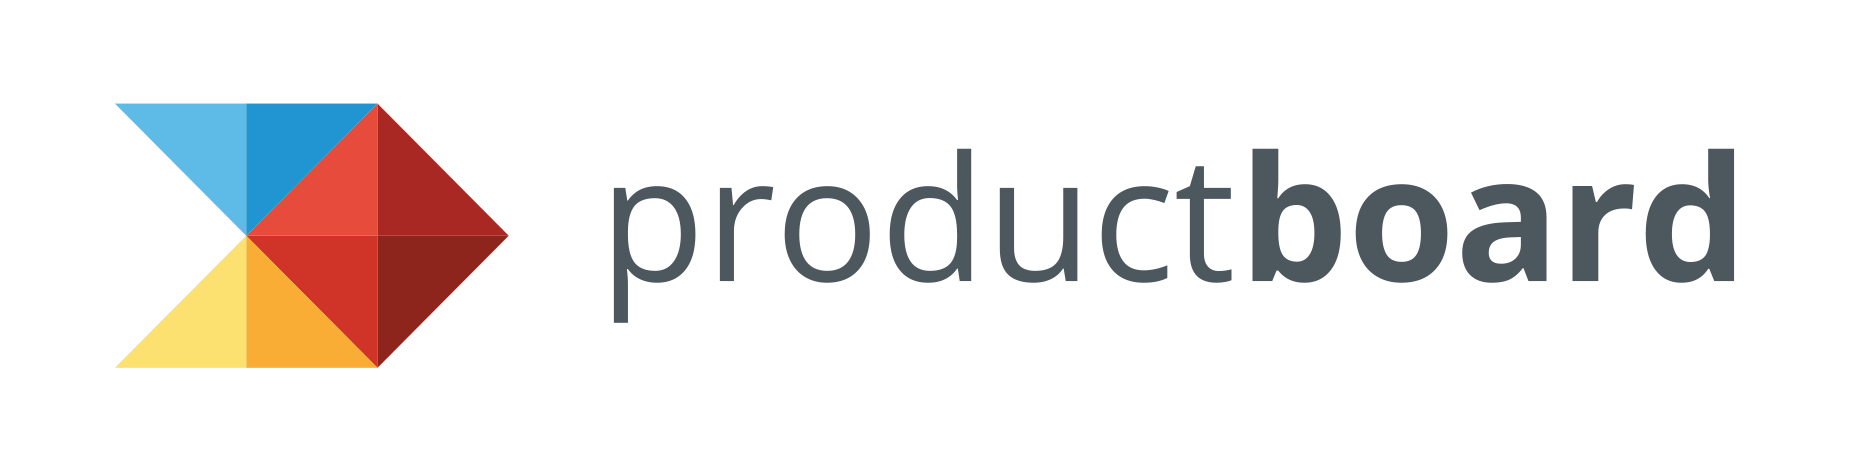 productboard logo for Pivotal Tracker integration